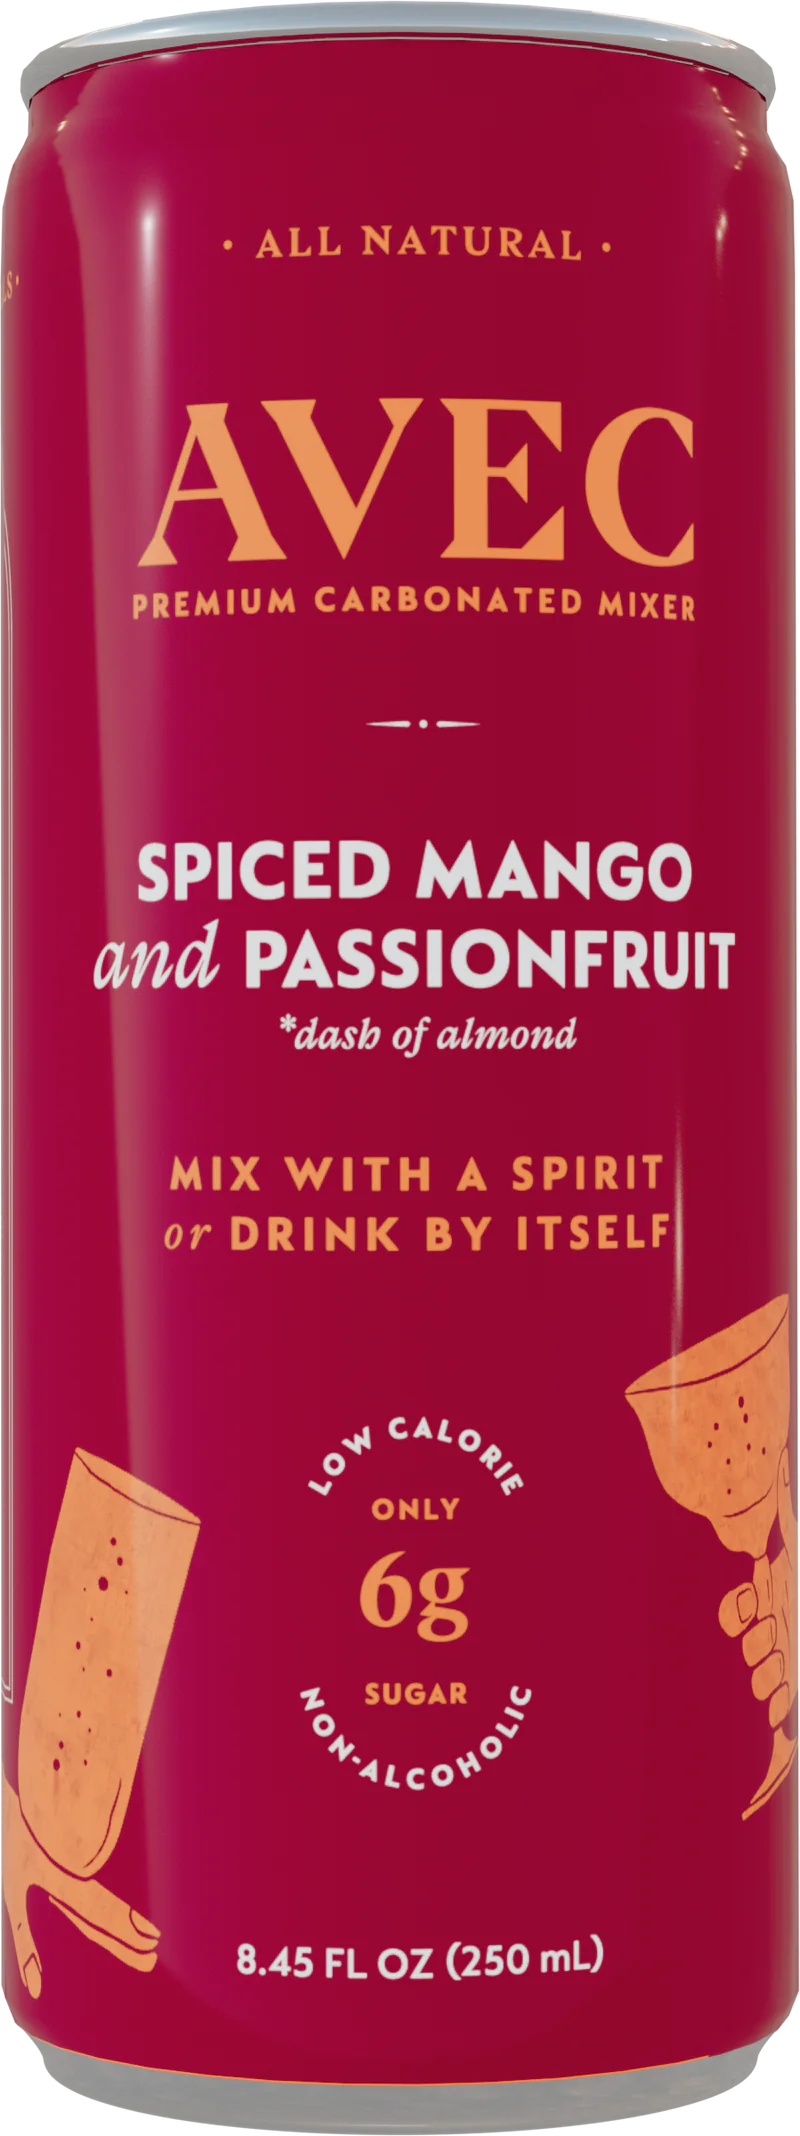 AVEC Spiced Mango and Passionfruit